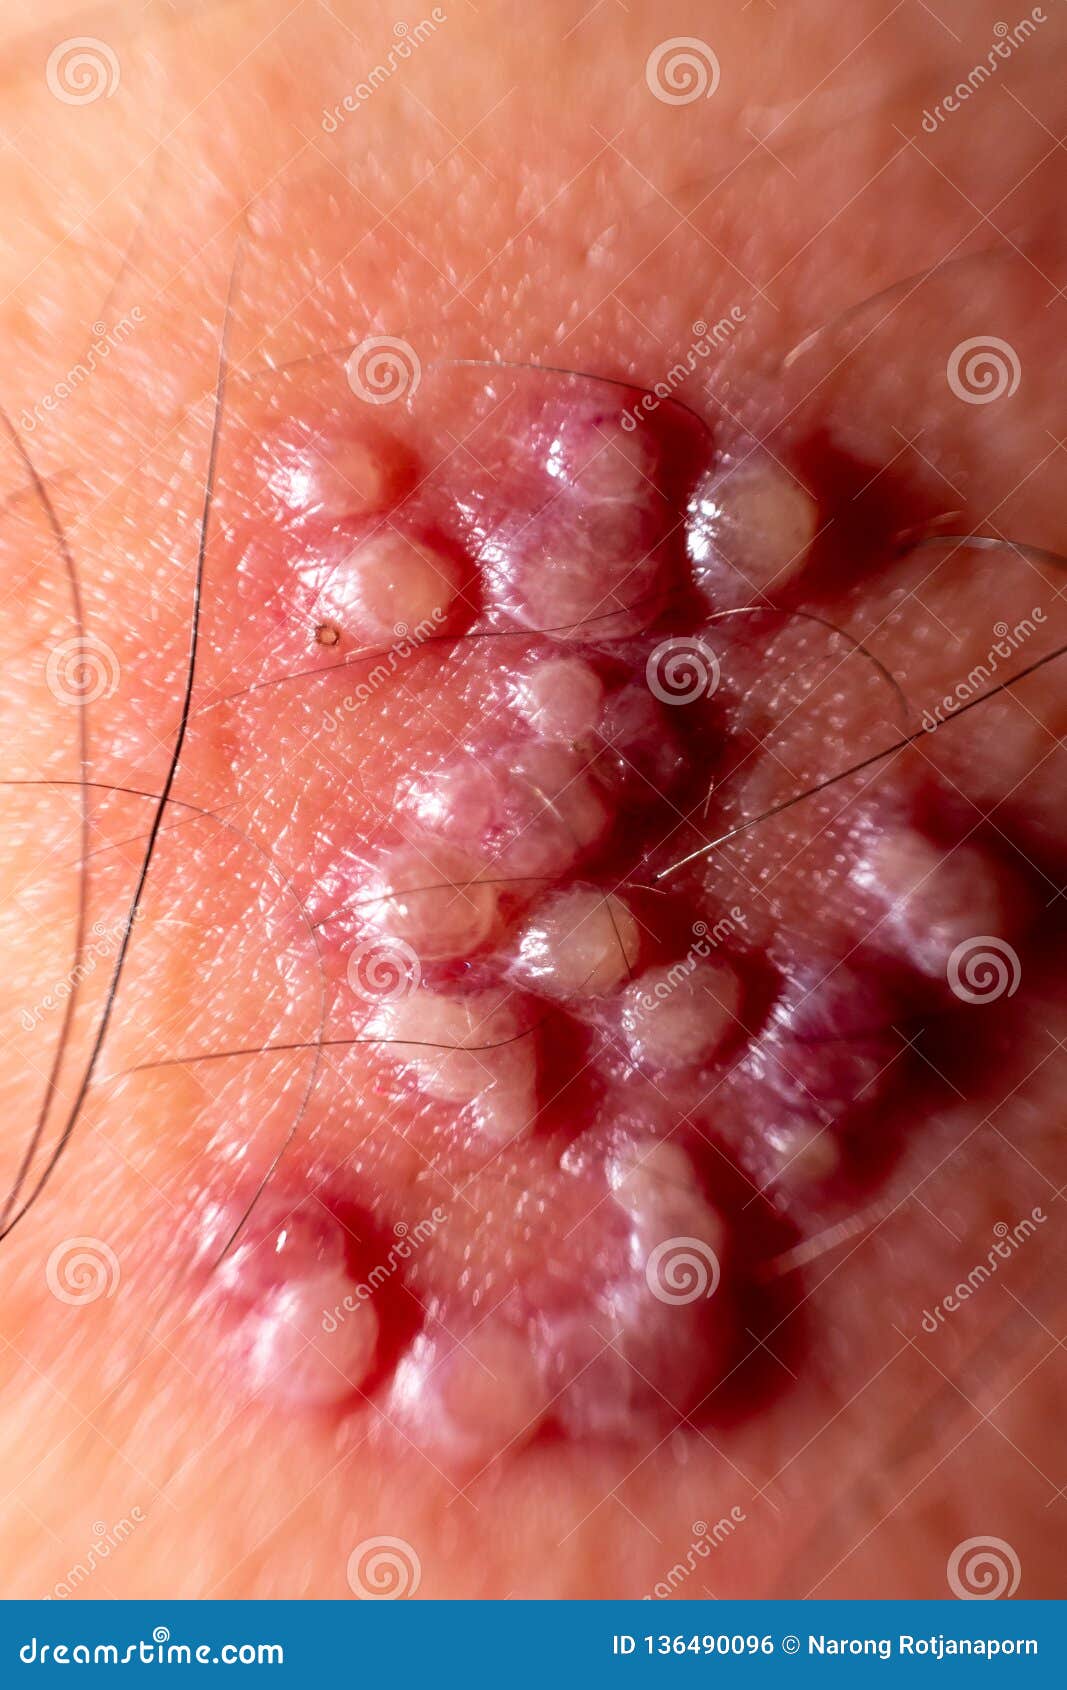 skin rash and blisters on body. shingles on men herpes zoster